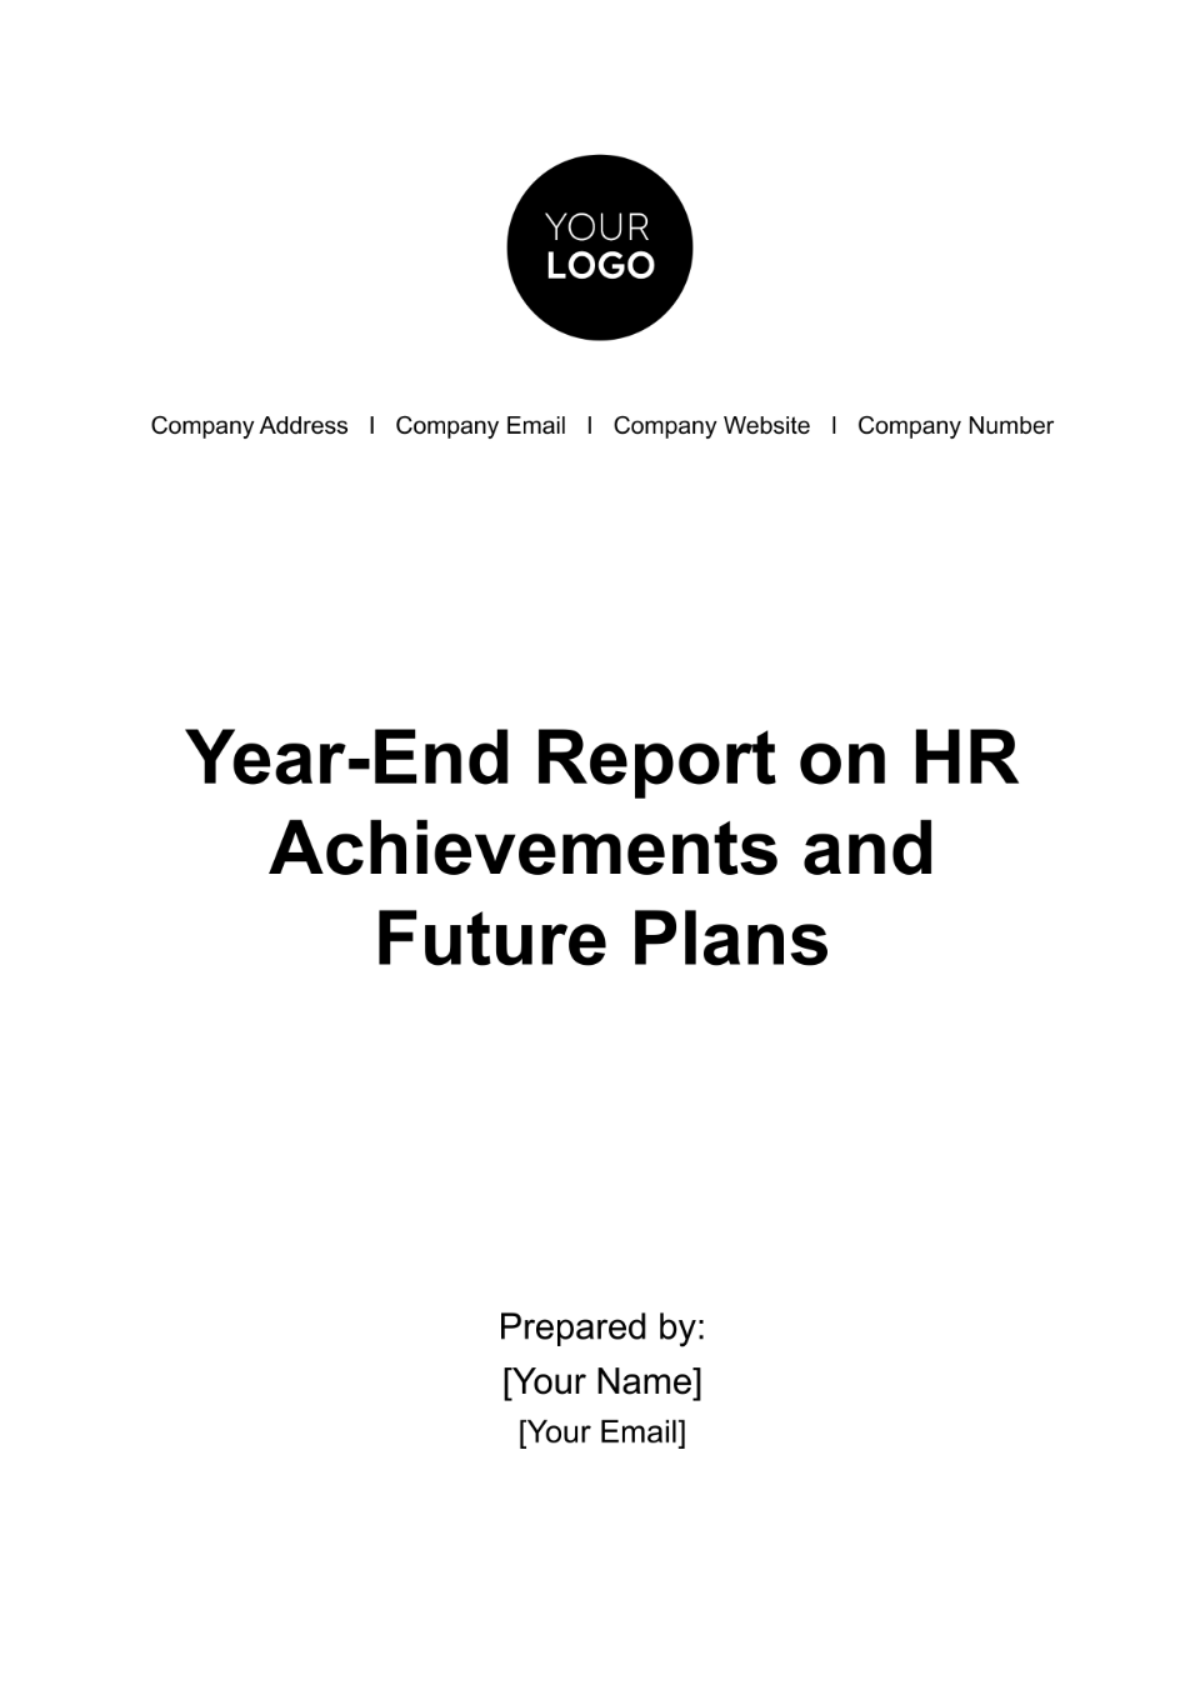 Year-End Report on HR Achievements and Future Plans Template